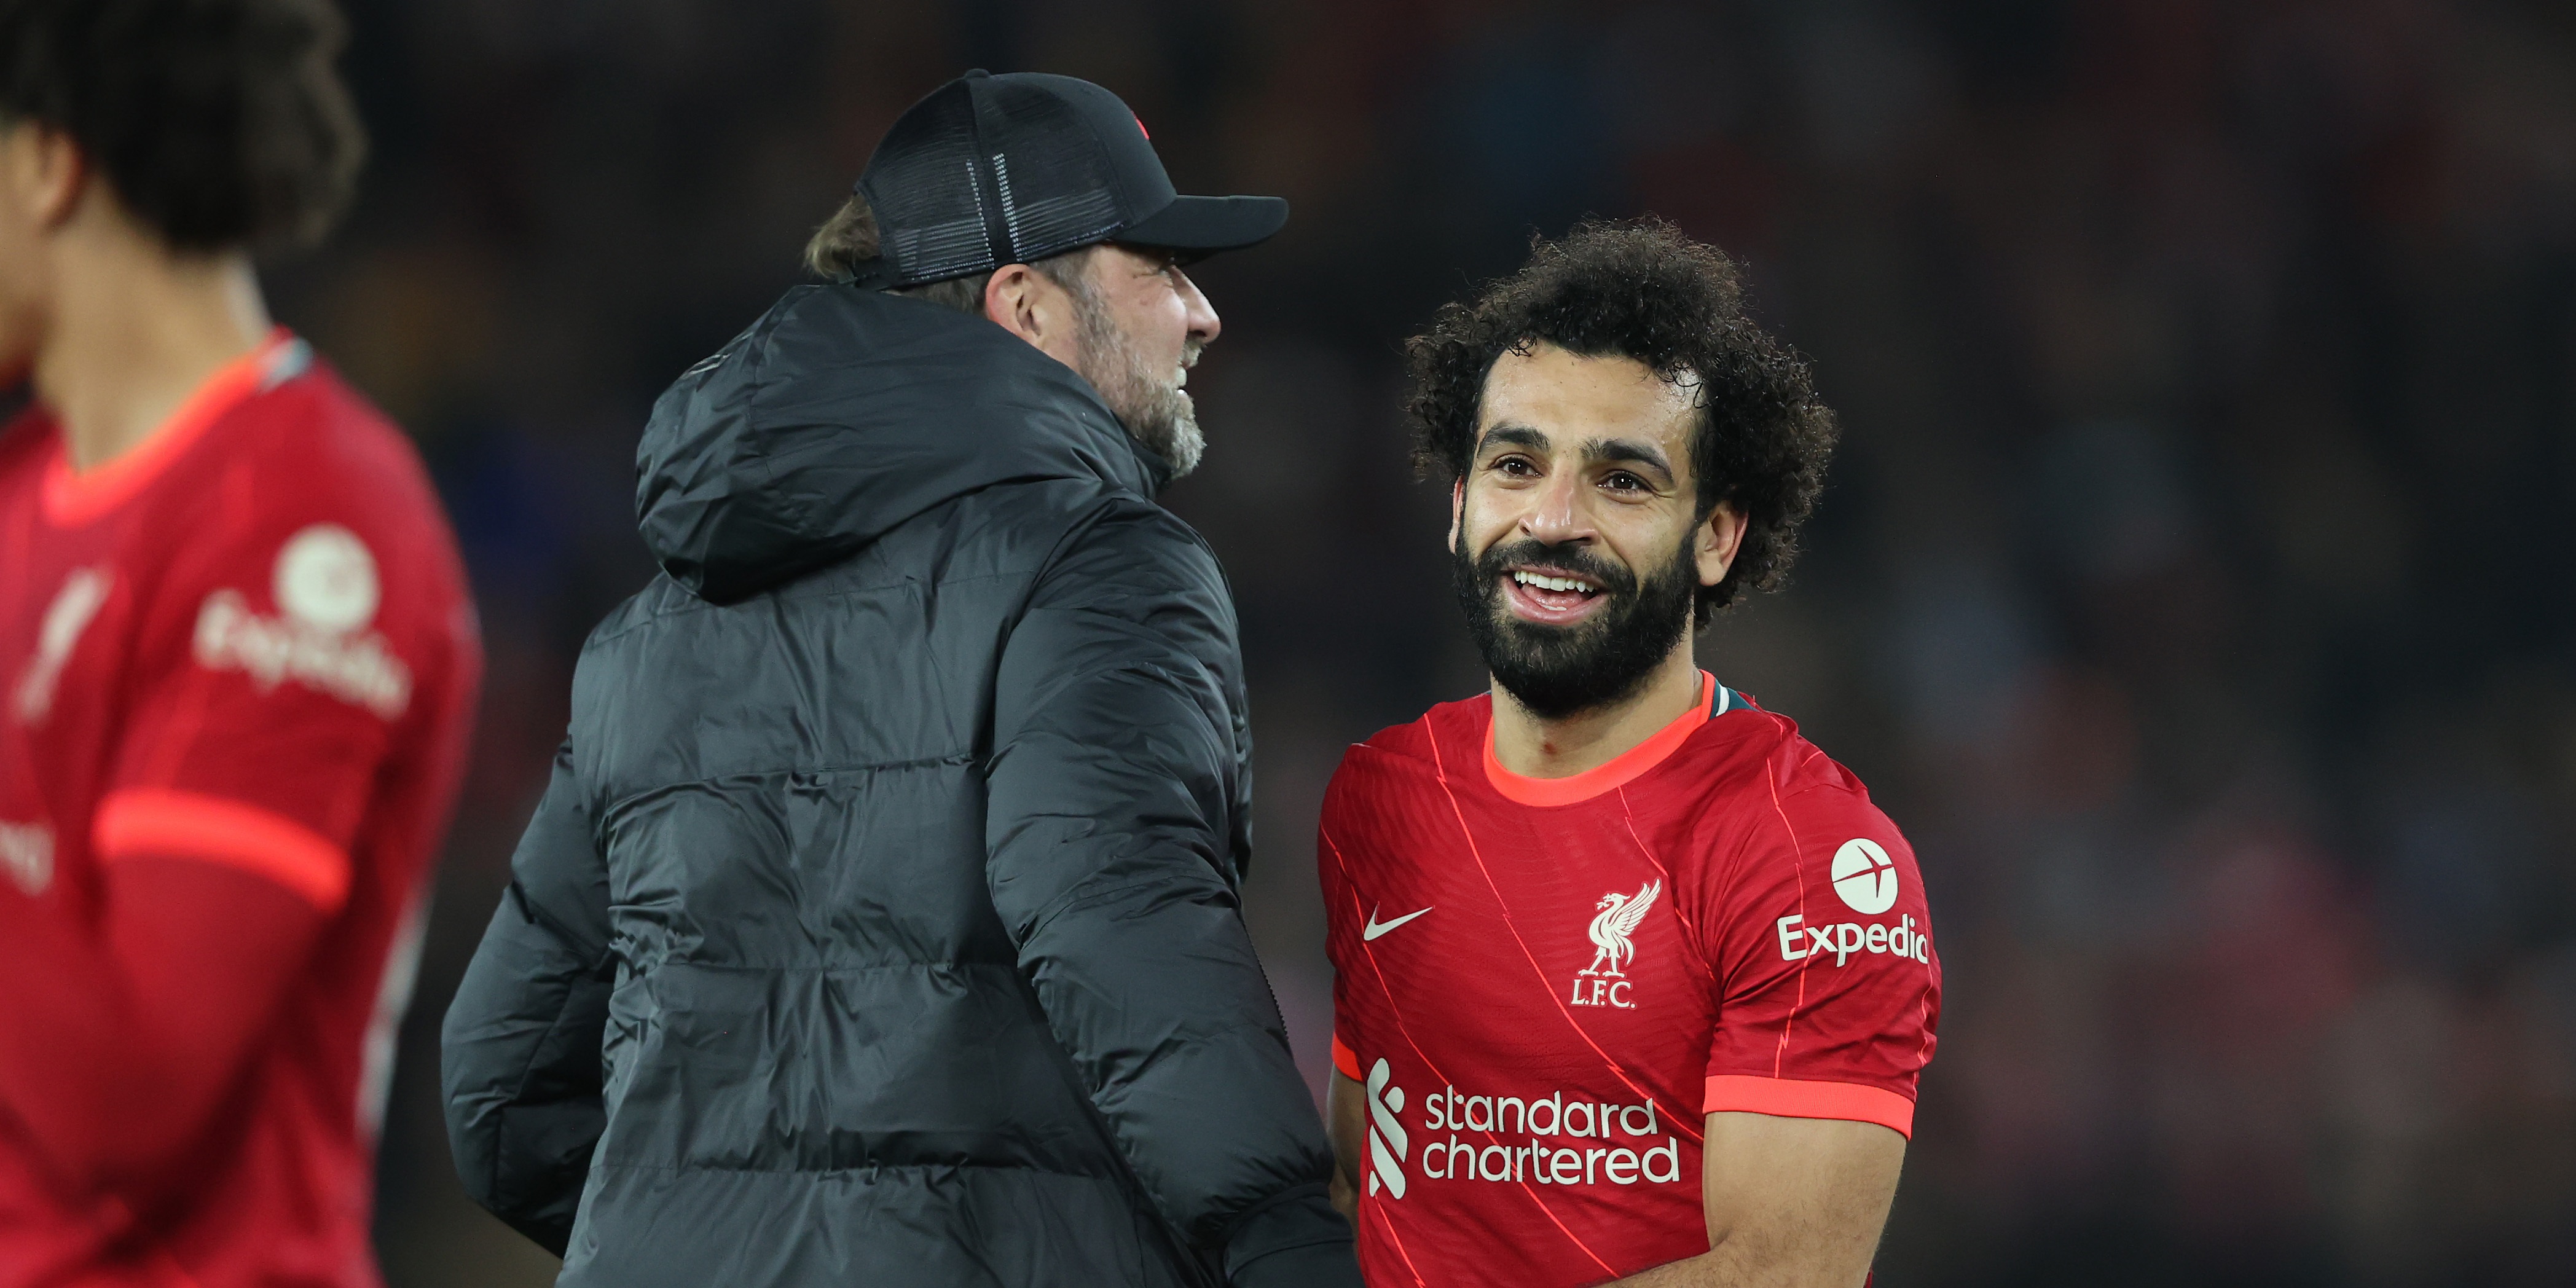 ‘That’s why we’re here now’ – Mo Salah insists Liverpool ‘had benefits’ following their Champions League final defeat to Real Madrid in 2018 and remembers back to a crucial meeting with Jurgen Klopp